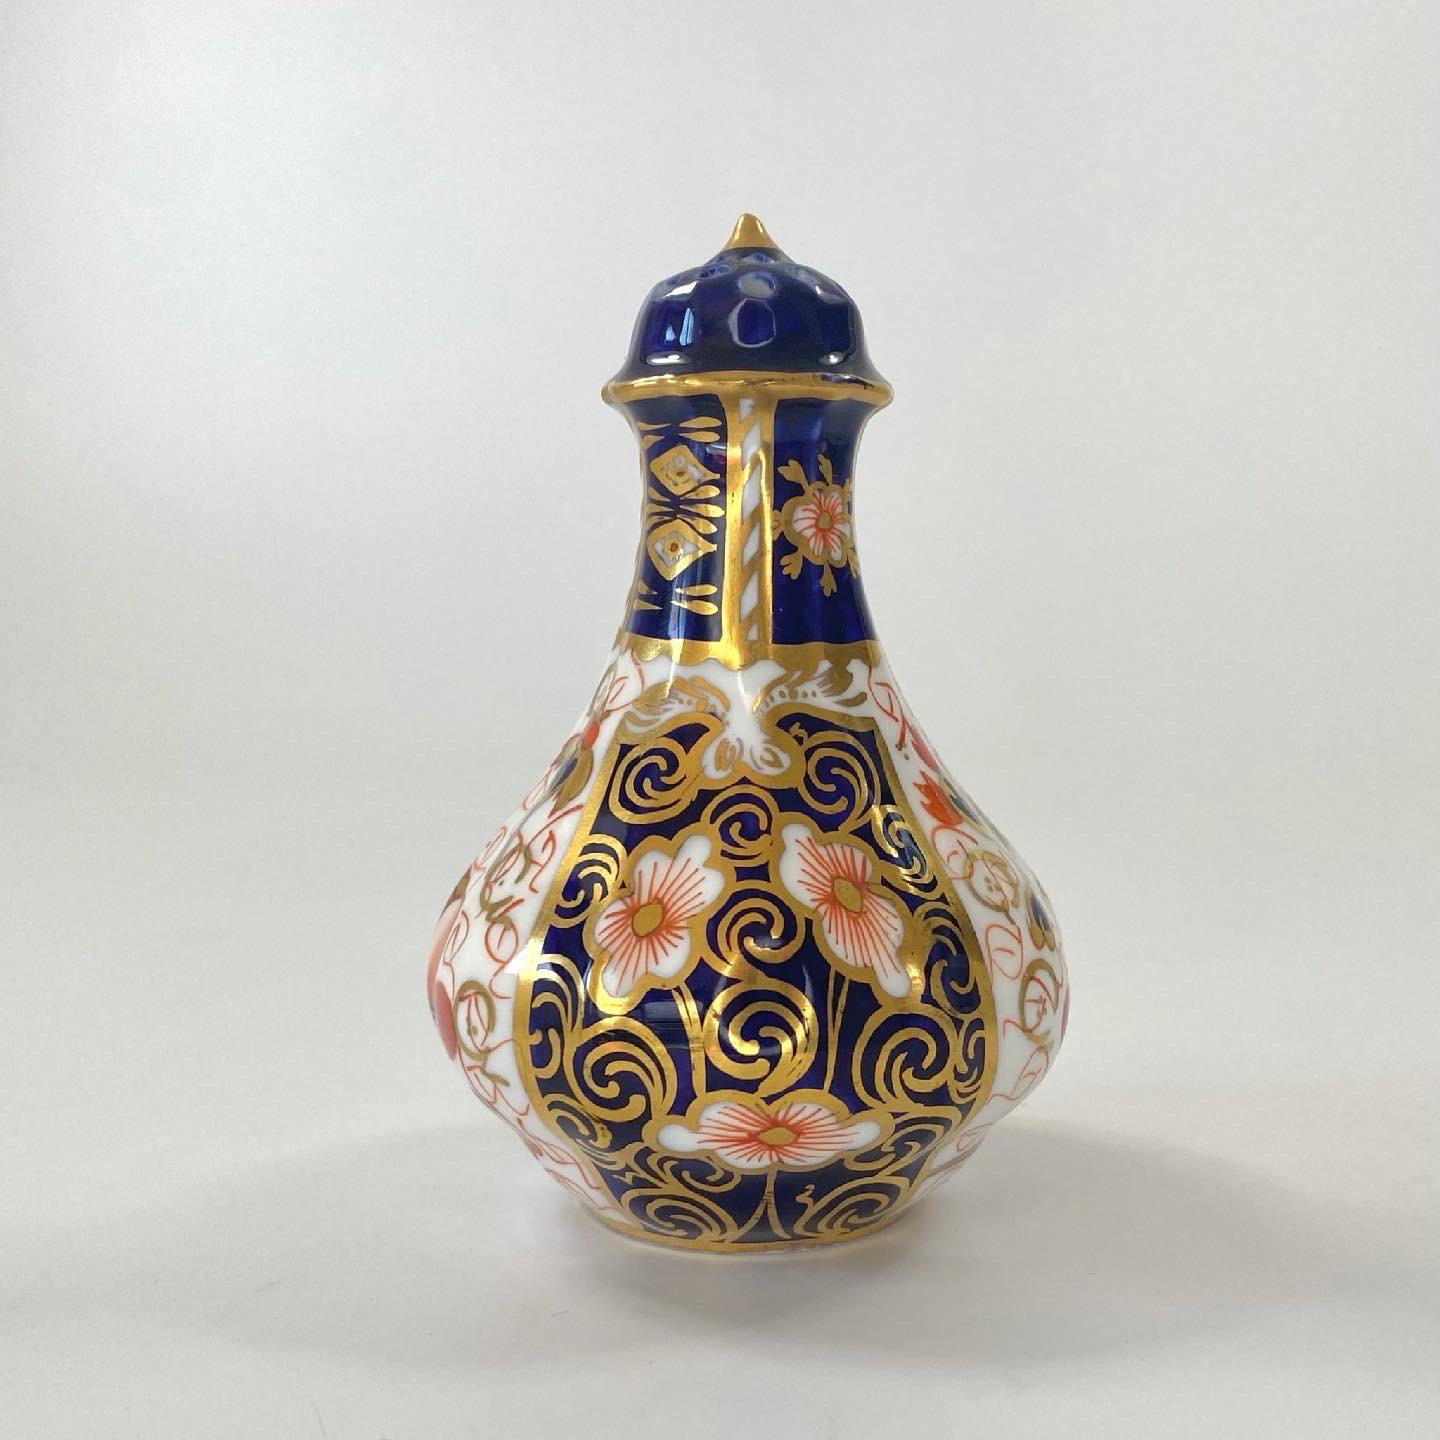 Royal Crown Derby porcelain pepper pot, dated 1914. The pepper pot painted in the Imari pattern ‘2451’, and heightened in gilt. Having a fixed and pierced domed cover.
Iron red printed factory mark, and date code for 1914.
Medium: